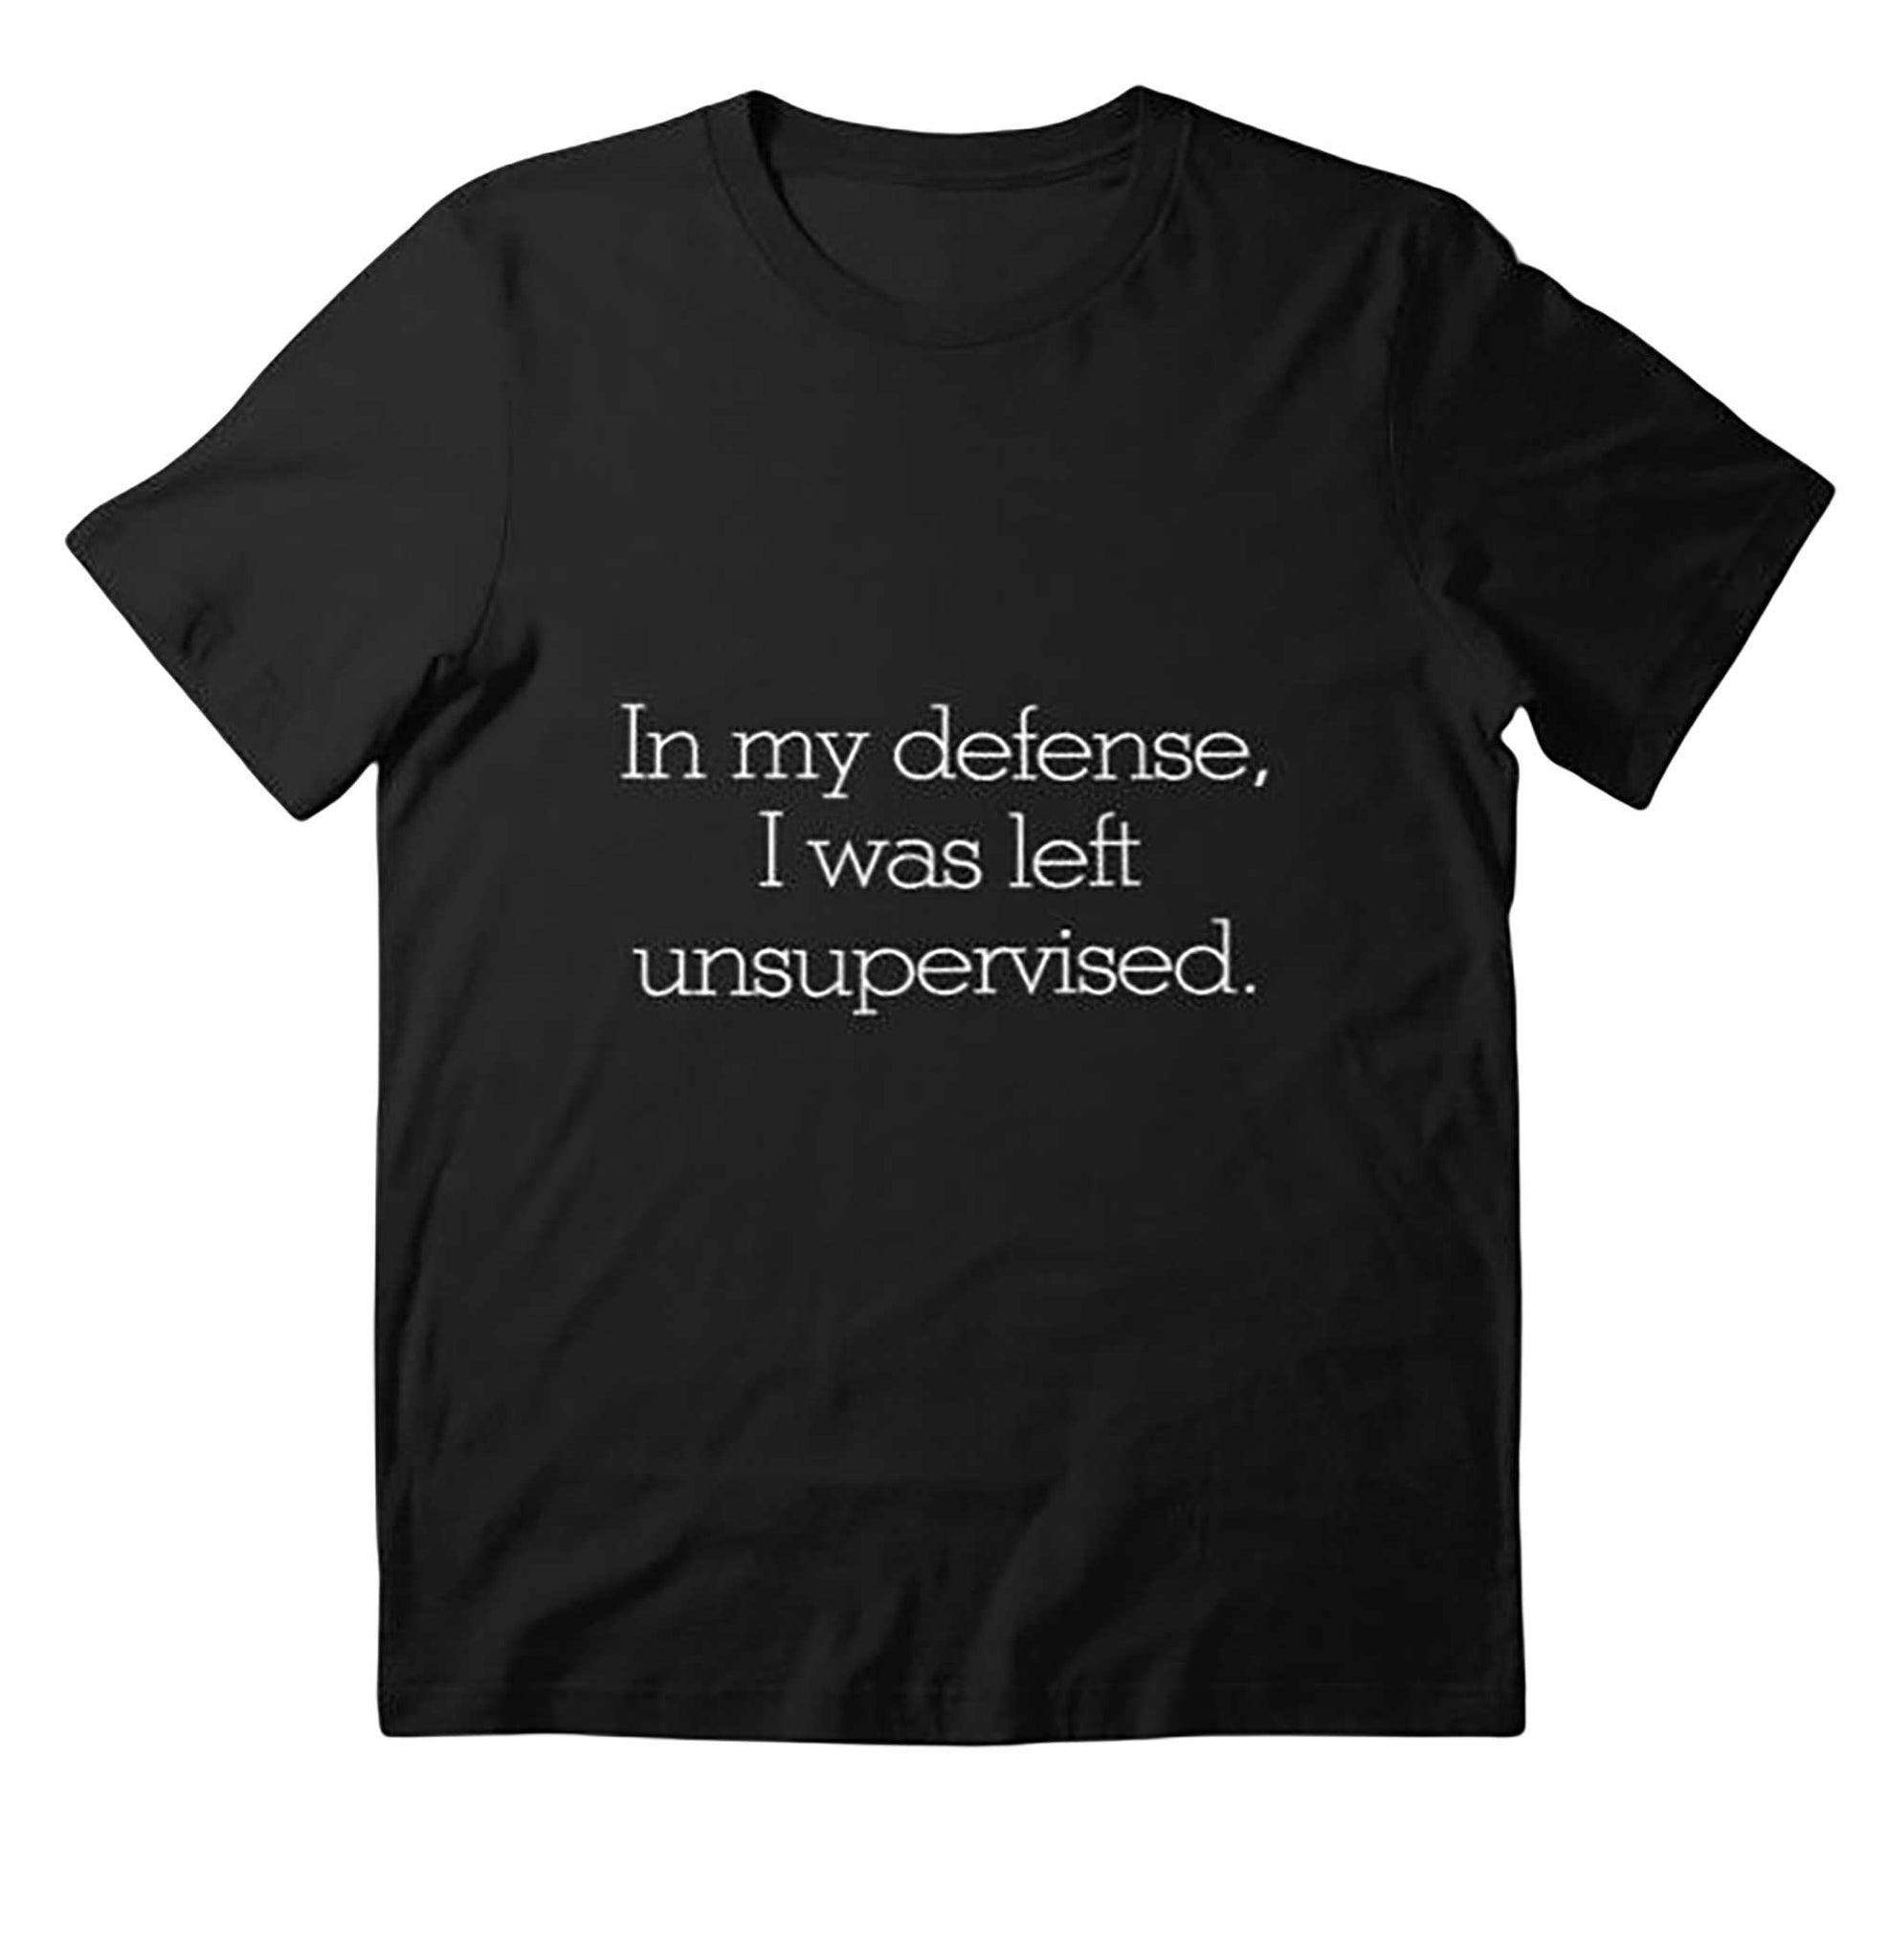 Skitongift-In-My-Defense-I-Was-Left-Unsupervised-Essential-T-Shirt-Funny-Shirts-Hoodie-Sweater-Short-Sleeve-Casual-Shirt